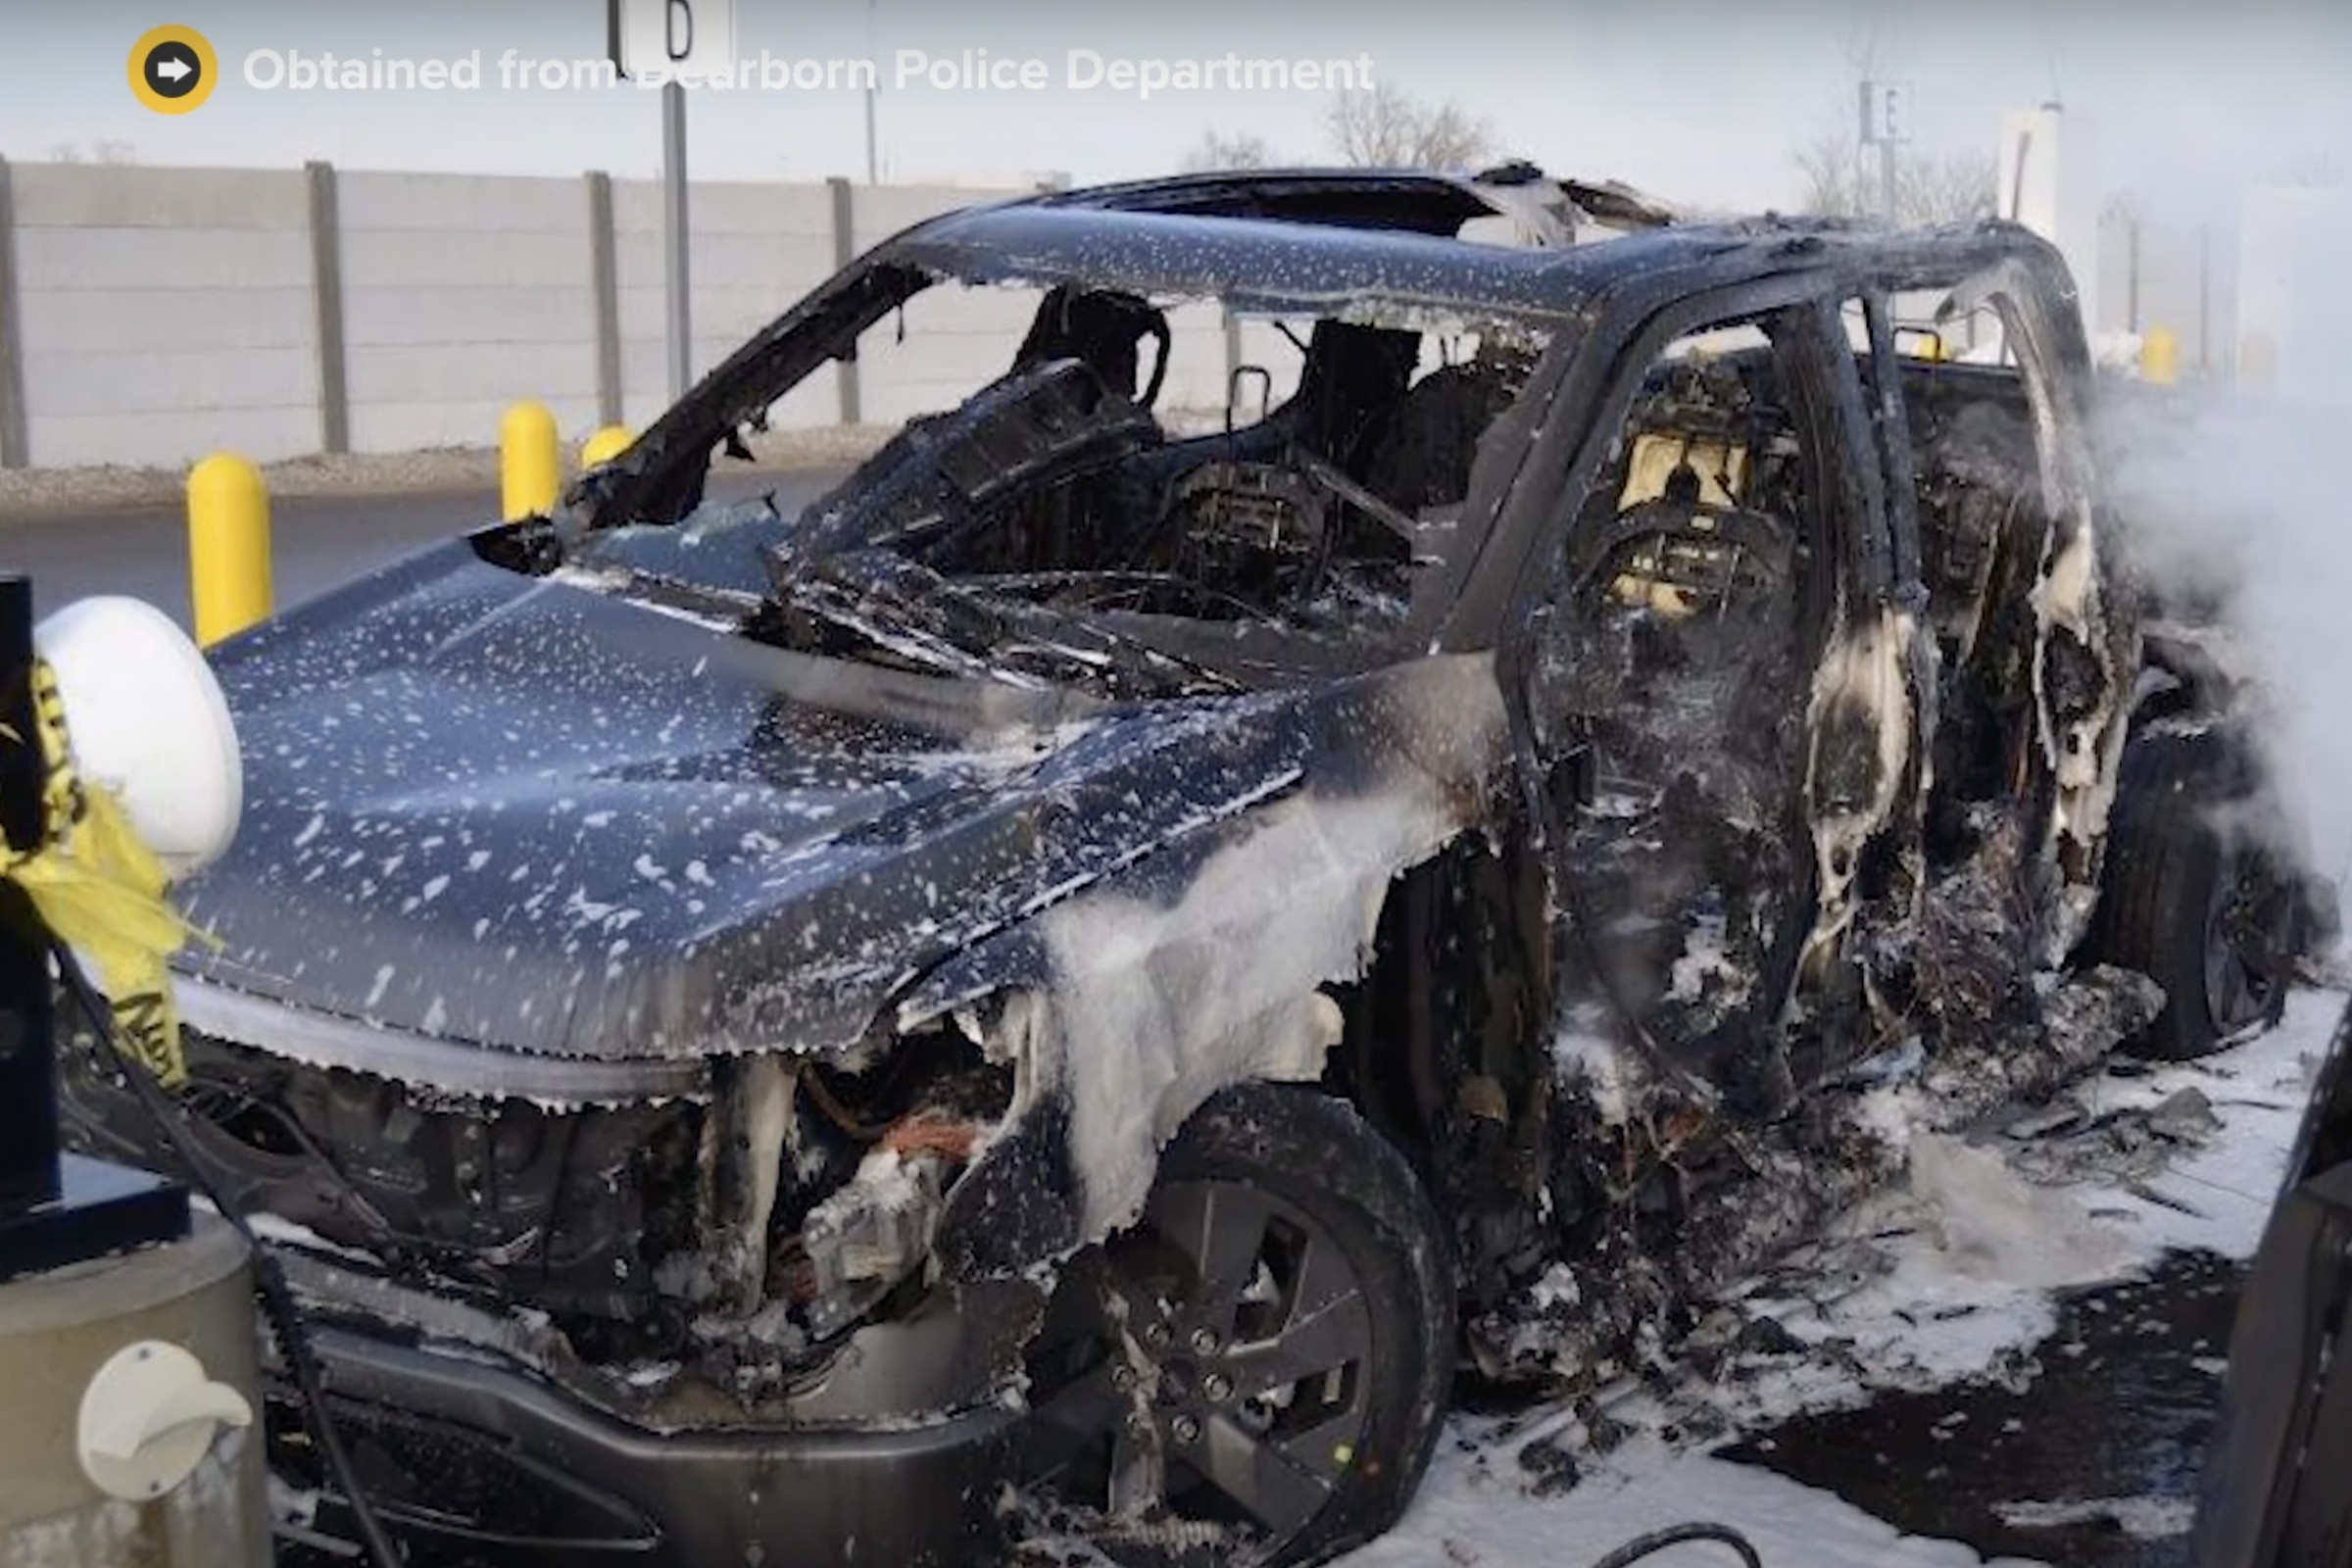 An image showing a Ford F-150 Lightning that has been destroyed by a fire